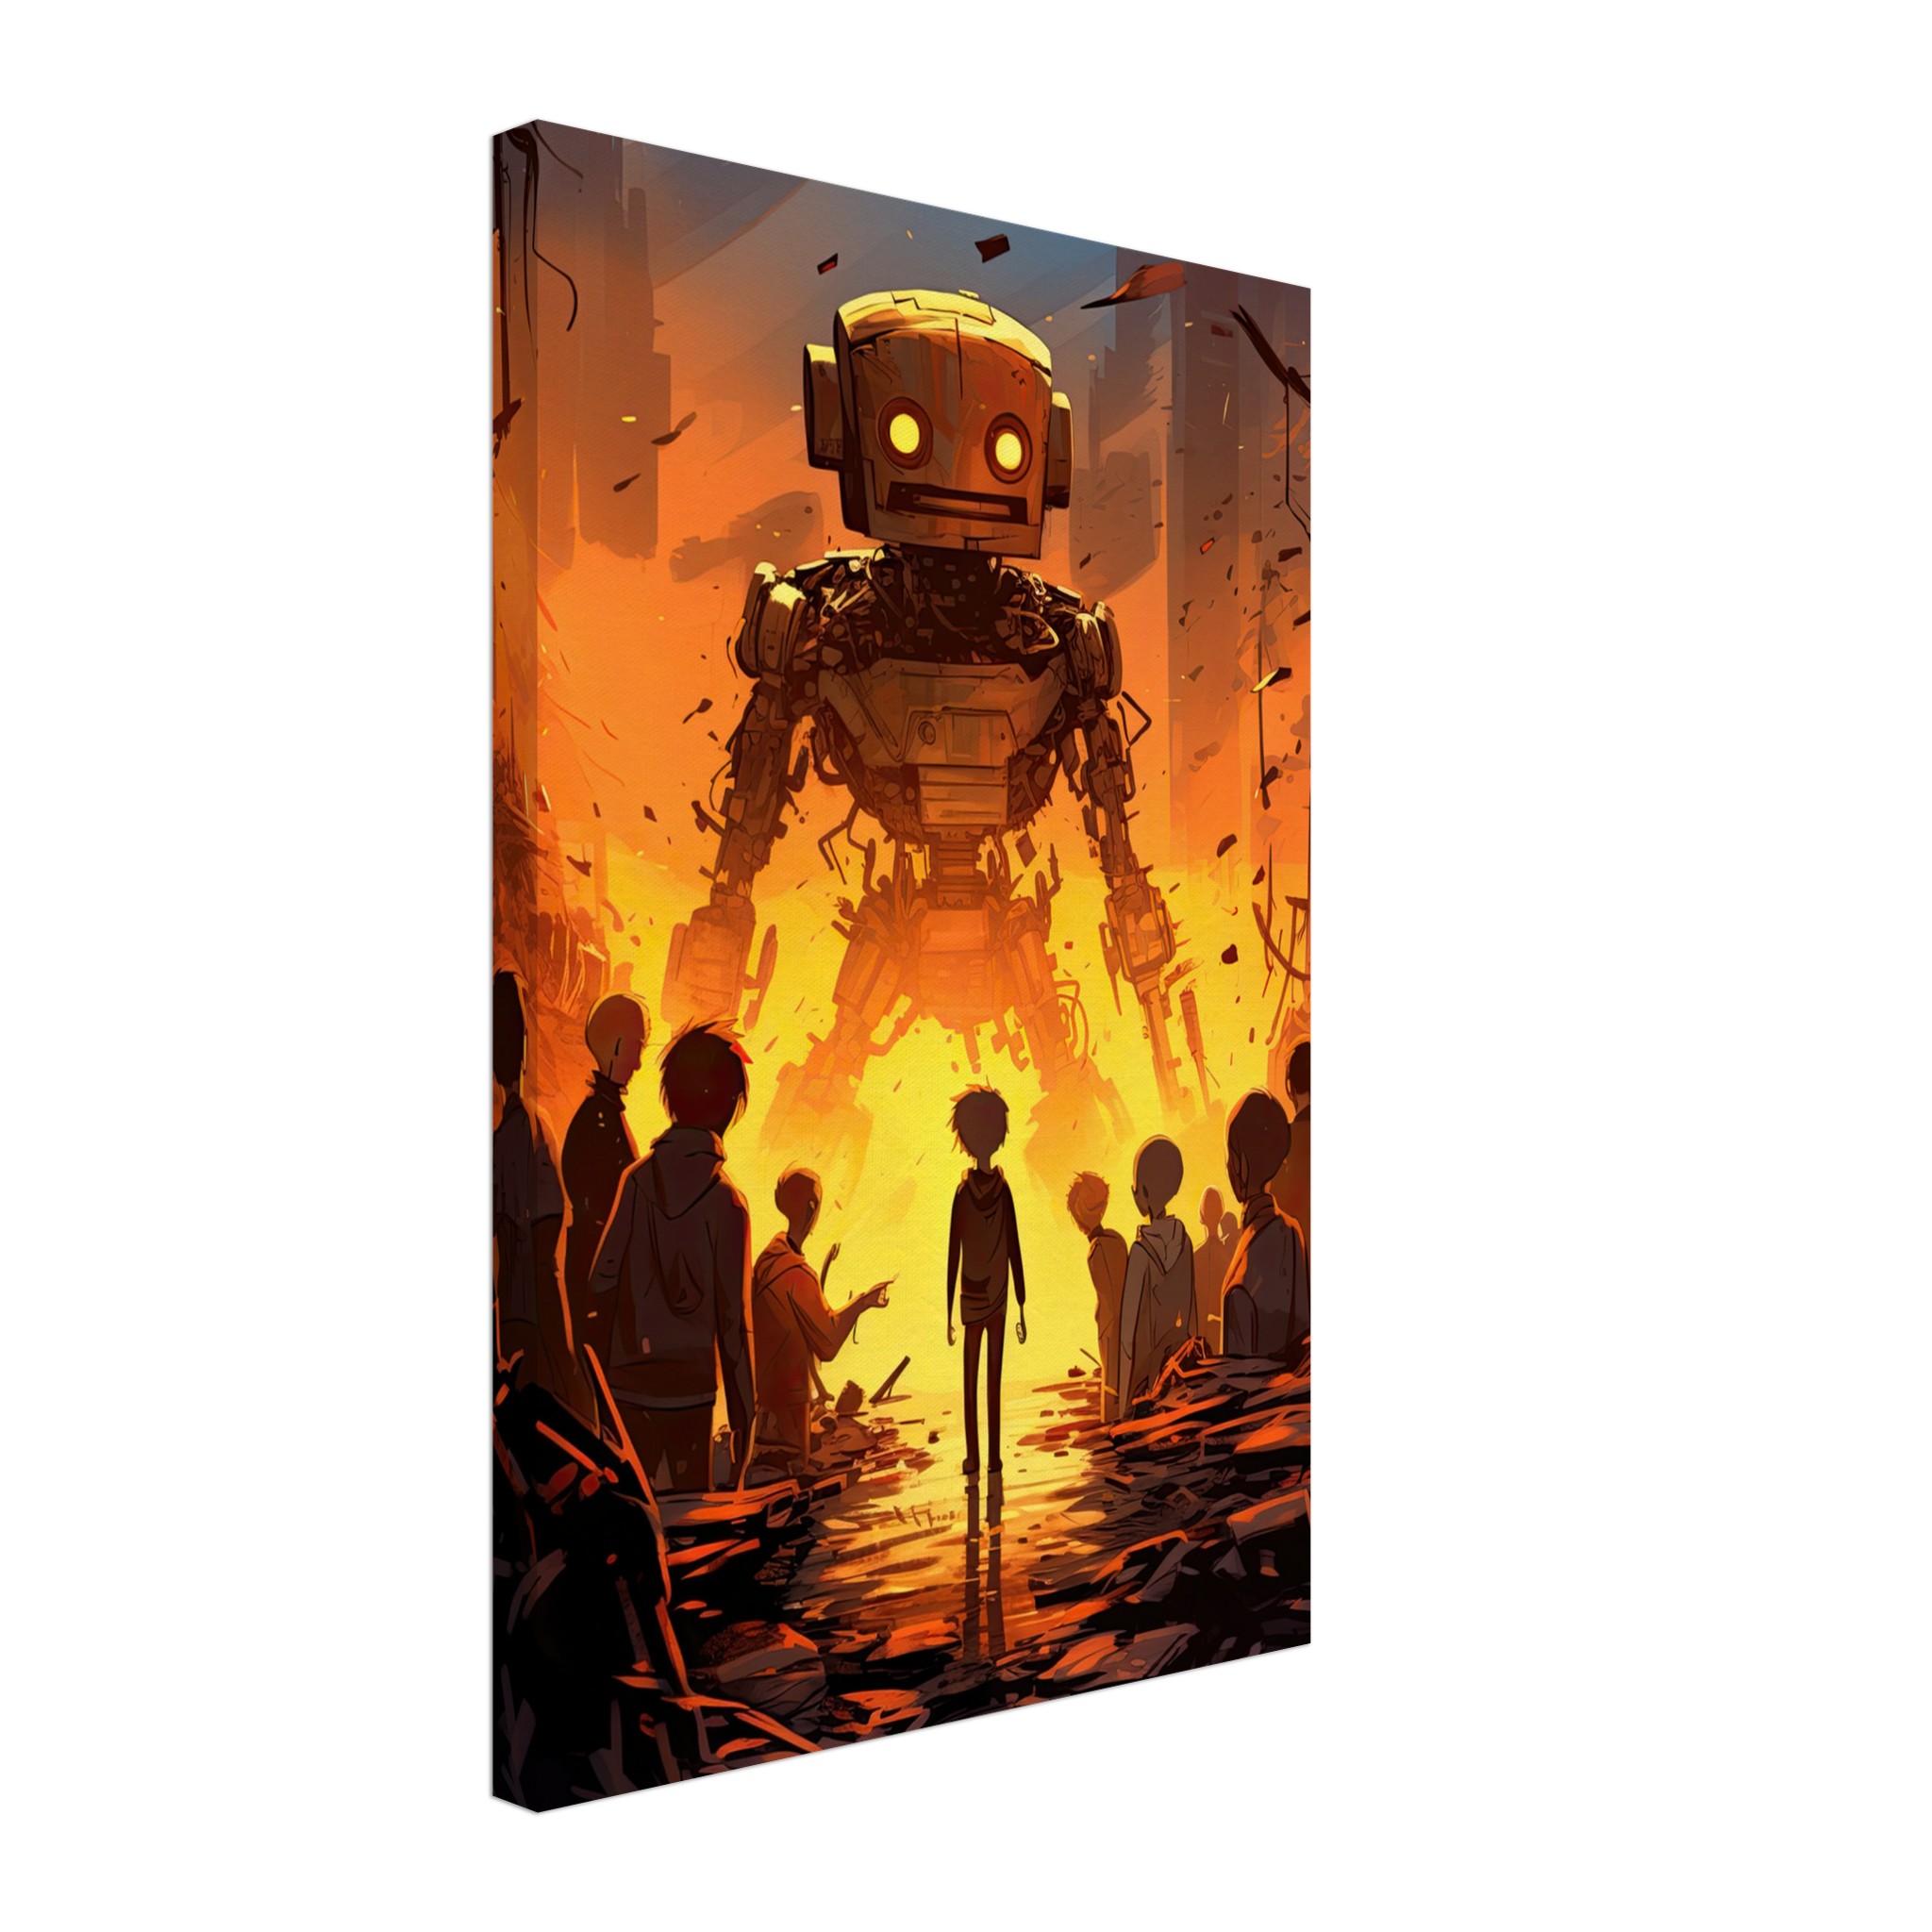 Robot Overlord – Anime Canvas Print – 40×60 cm / 16×24″, Thick